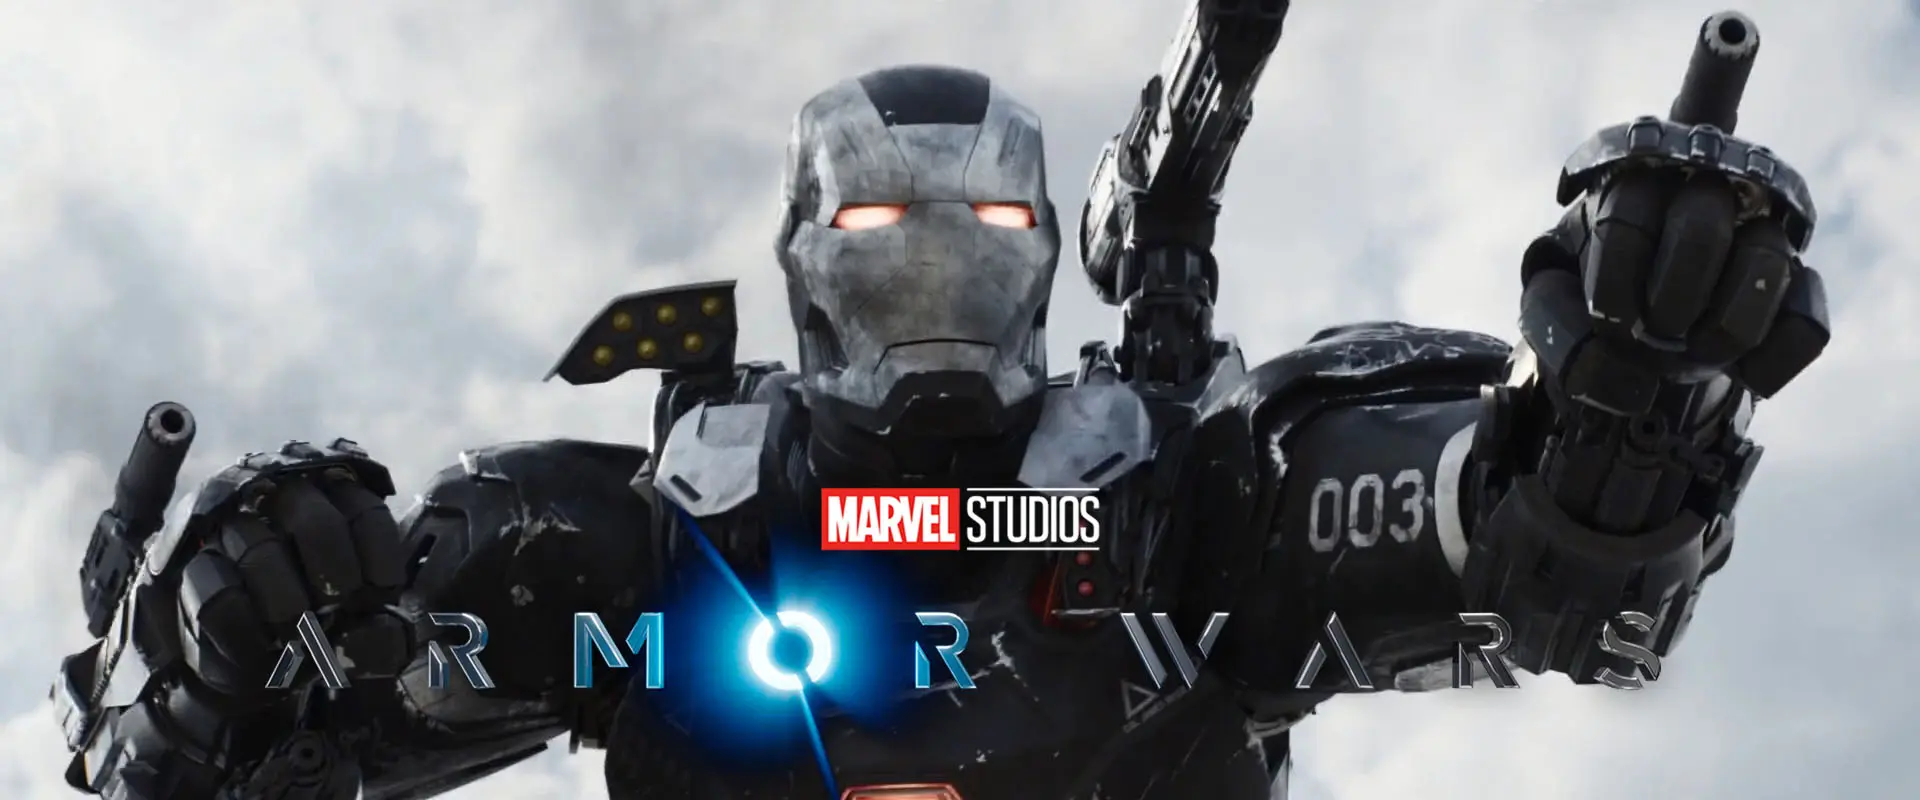 armor wars feature film banner